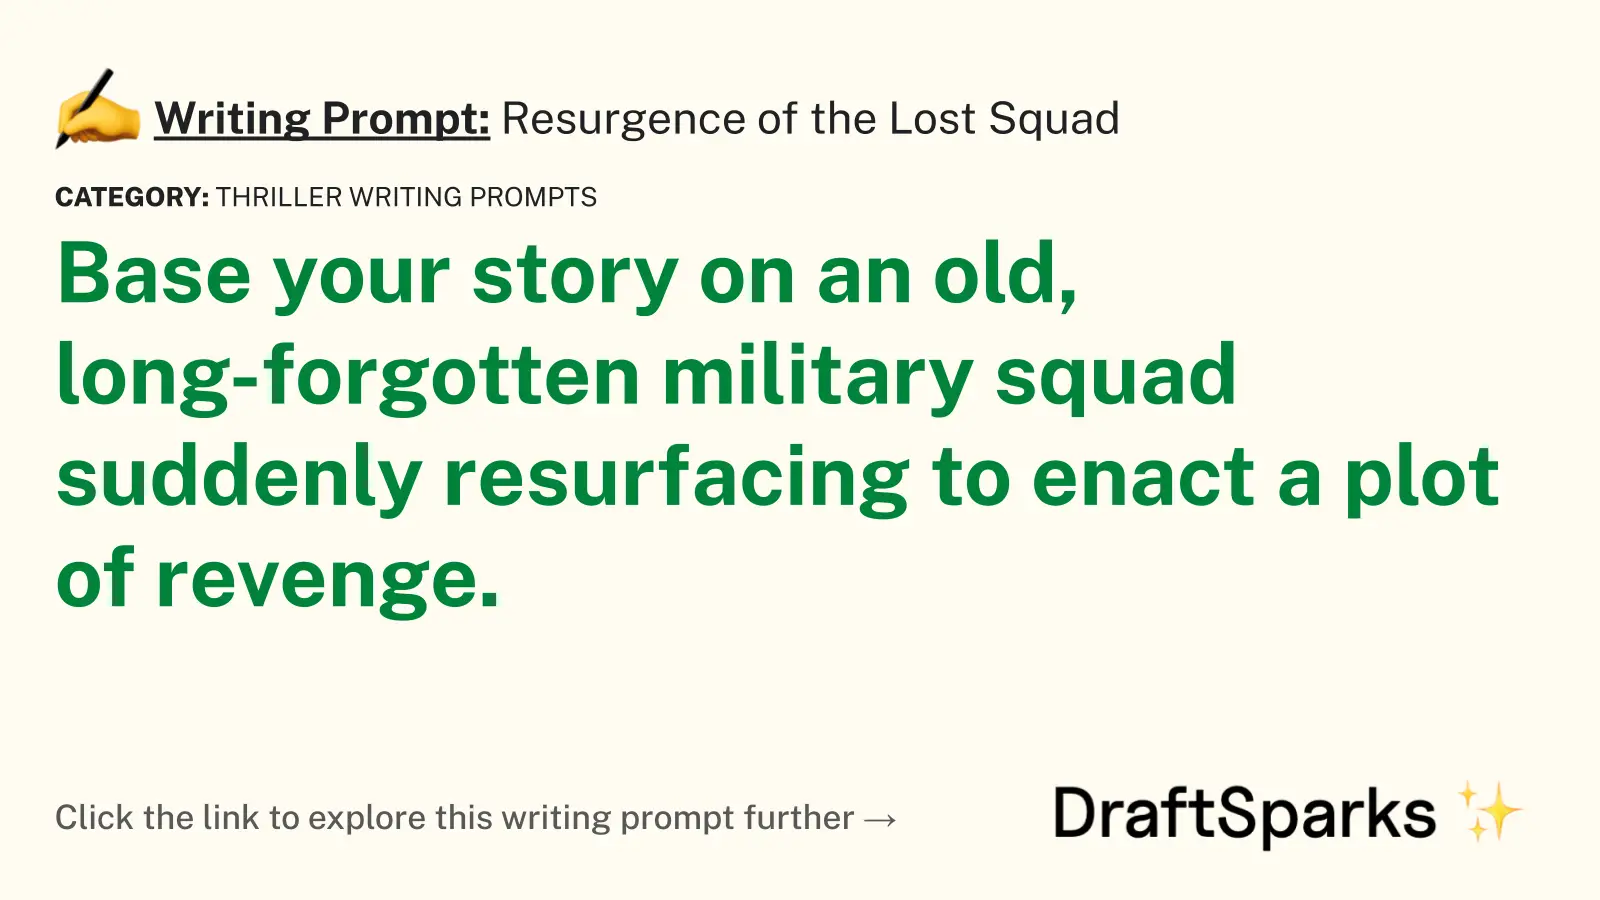 Resurgence of the Lost Squad